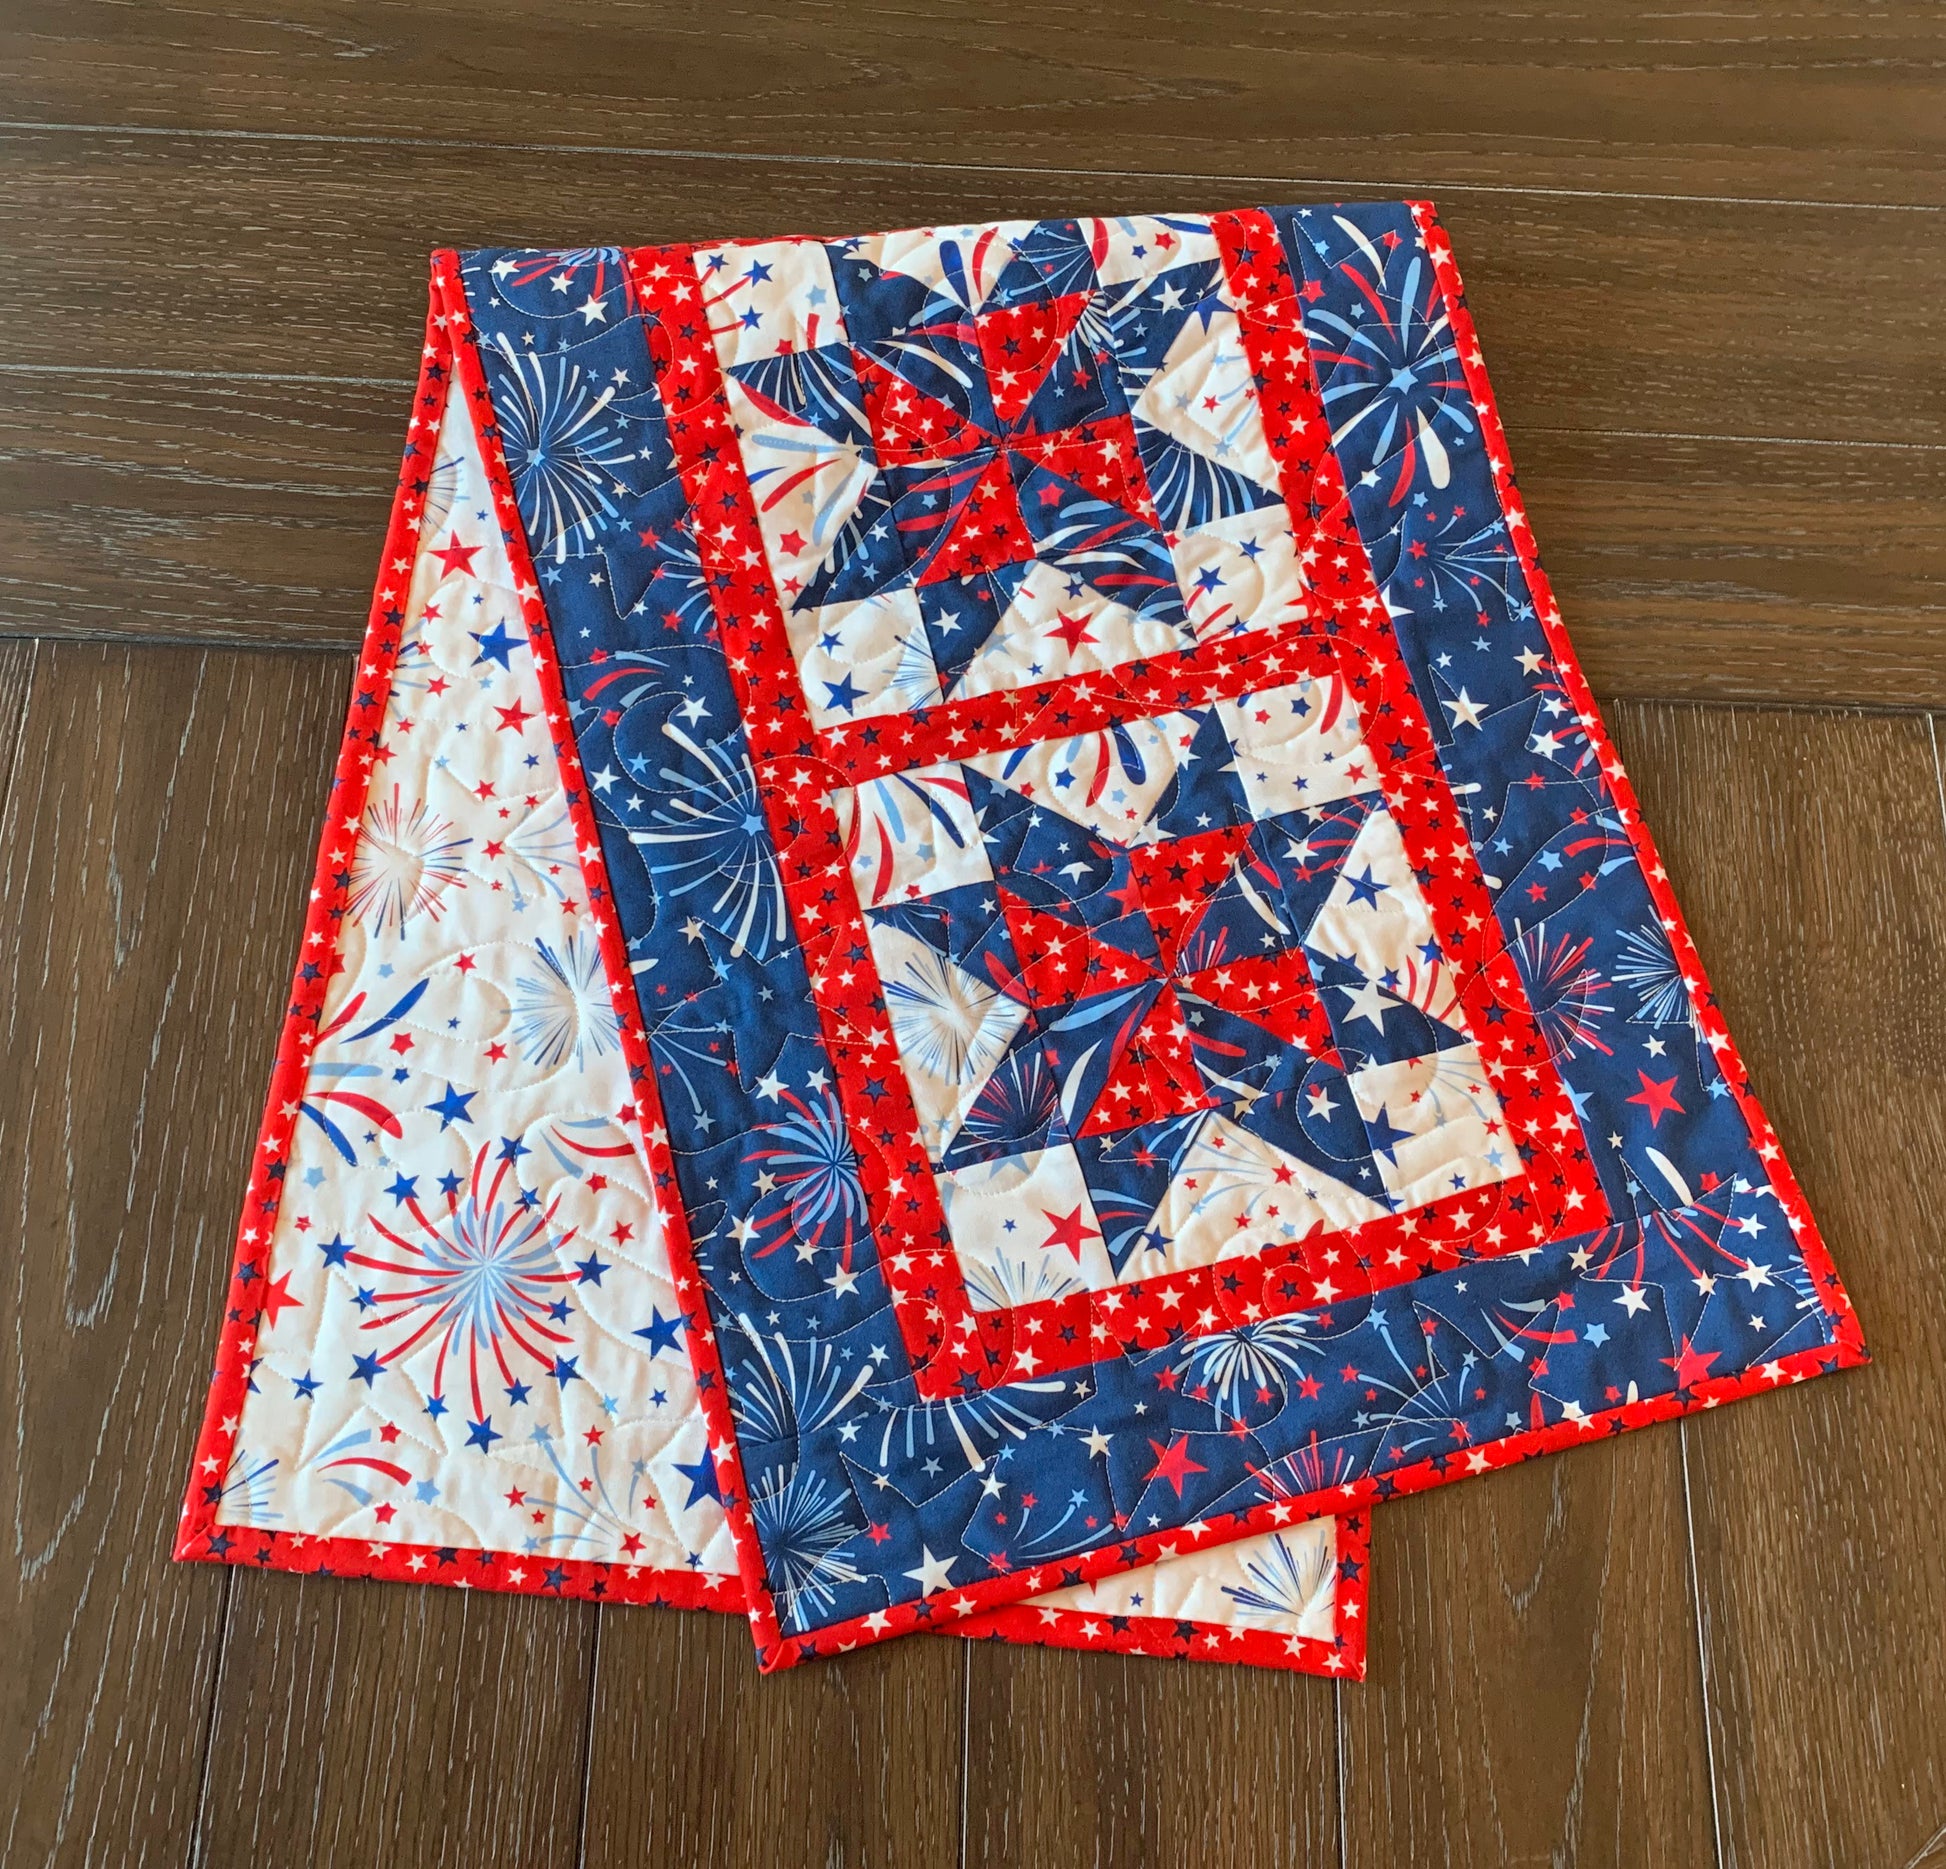 Red white and blue patriotic table runner pattern with four center star blocks that have a pinwheel in the center. The runner has red star sashing between the blocks and a blue fireworks border. Runner is shown folded on a table.